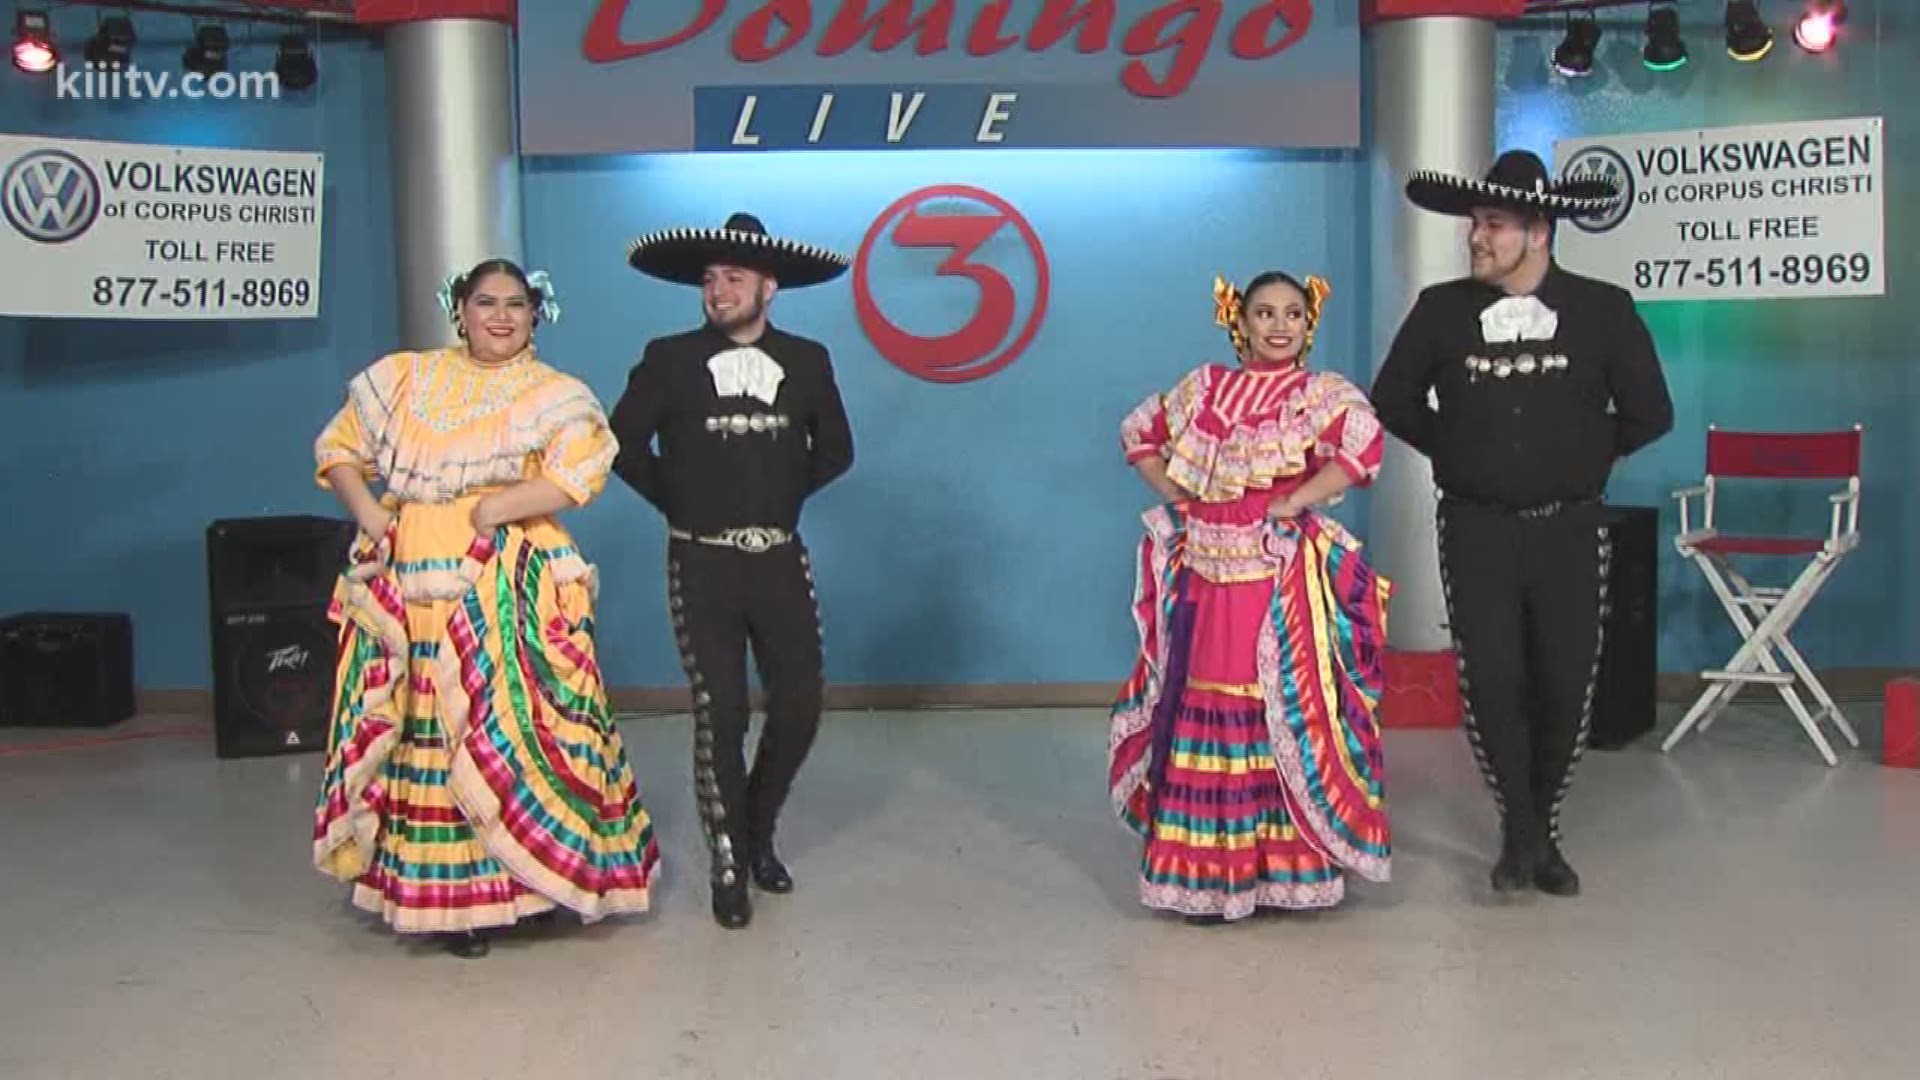 Alcorta's Folklorico performing to the song "El Tren" on Domingo Live.